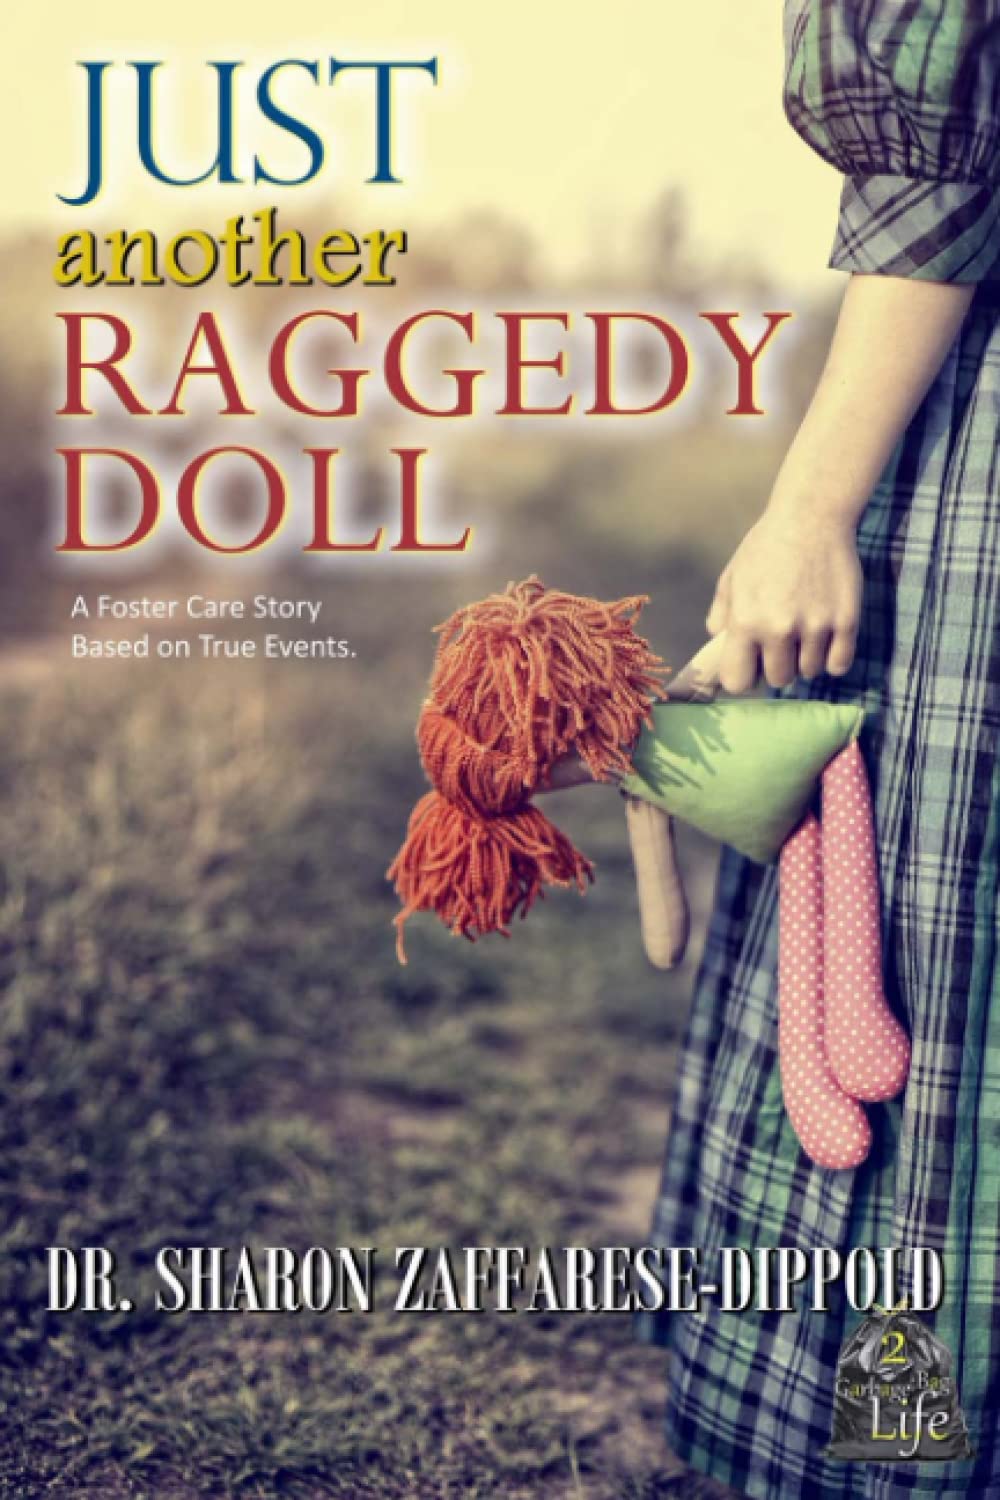 Just Another Raggedy Doll: A Foster Care Story Based on True Events (Garbage Bag Life)